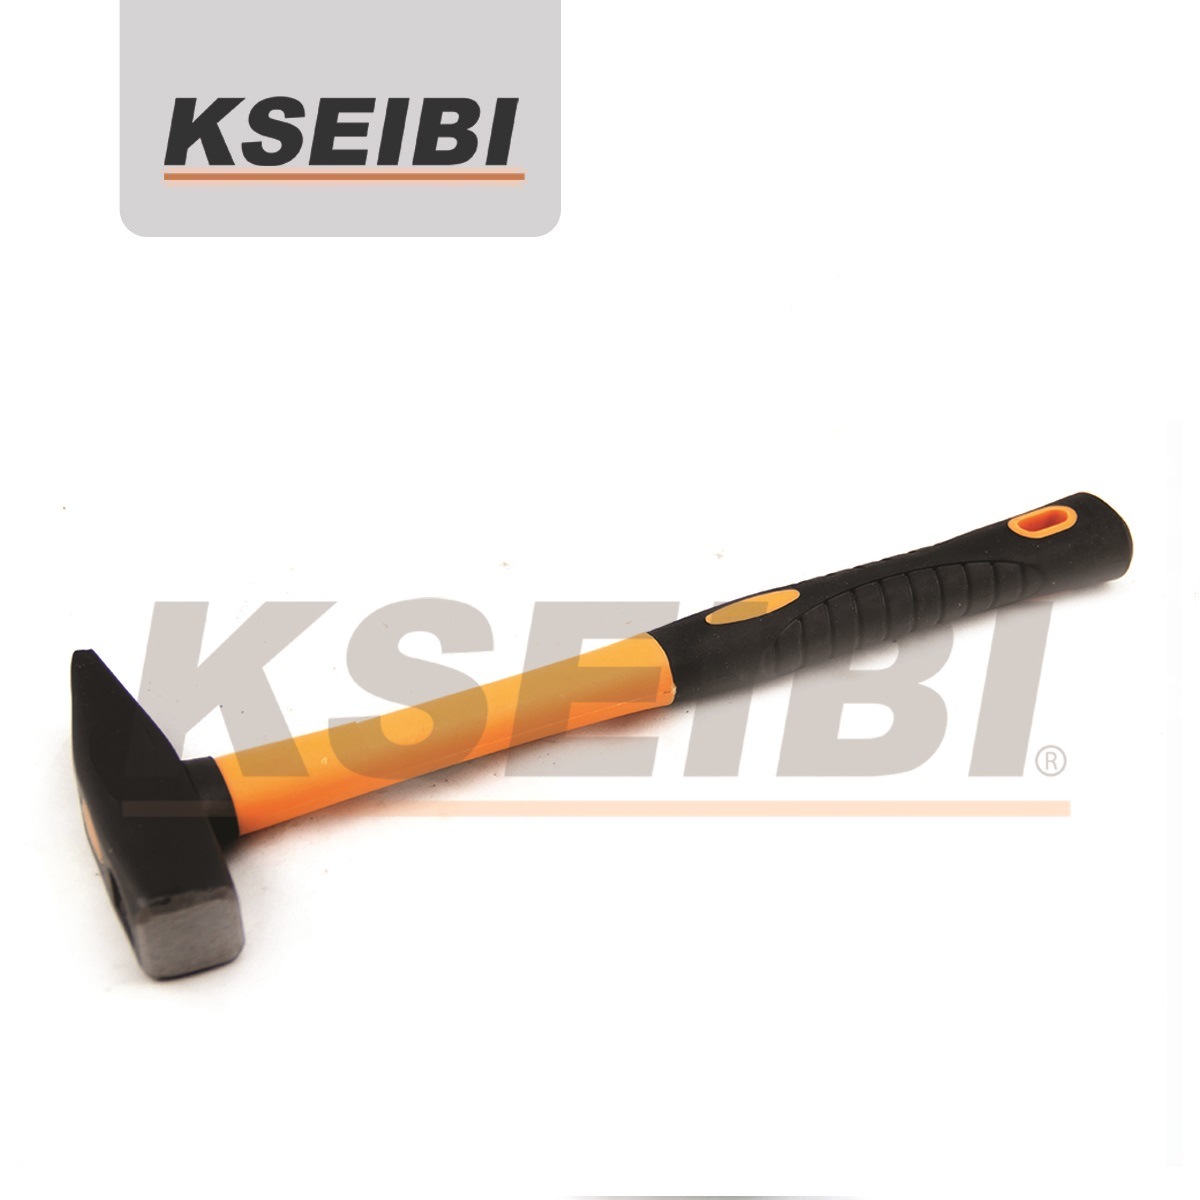 Cross Pein and Chipping Kseibi Engineers Hammer with Progrip Handle